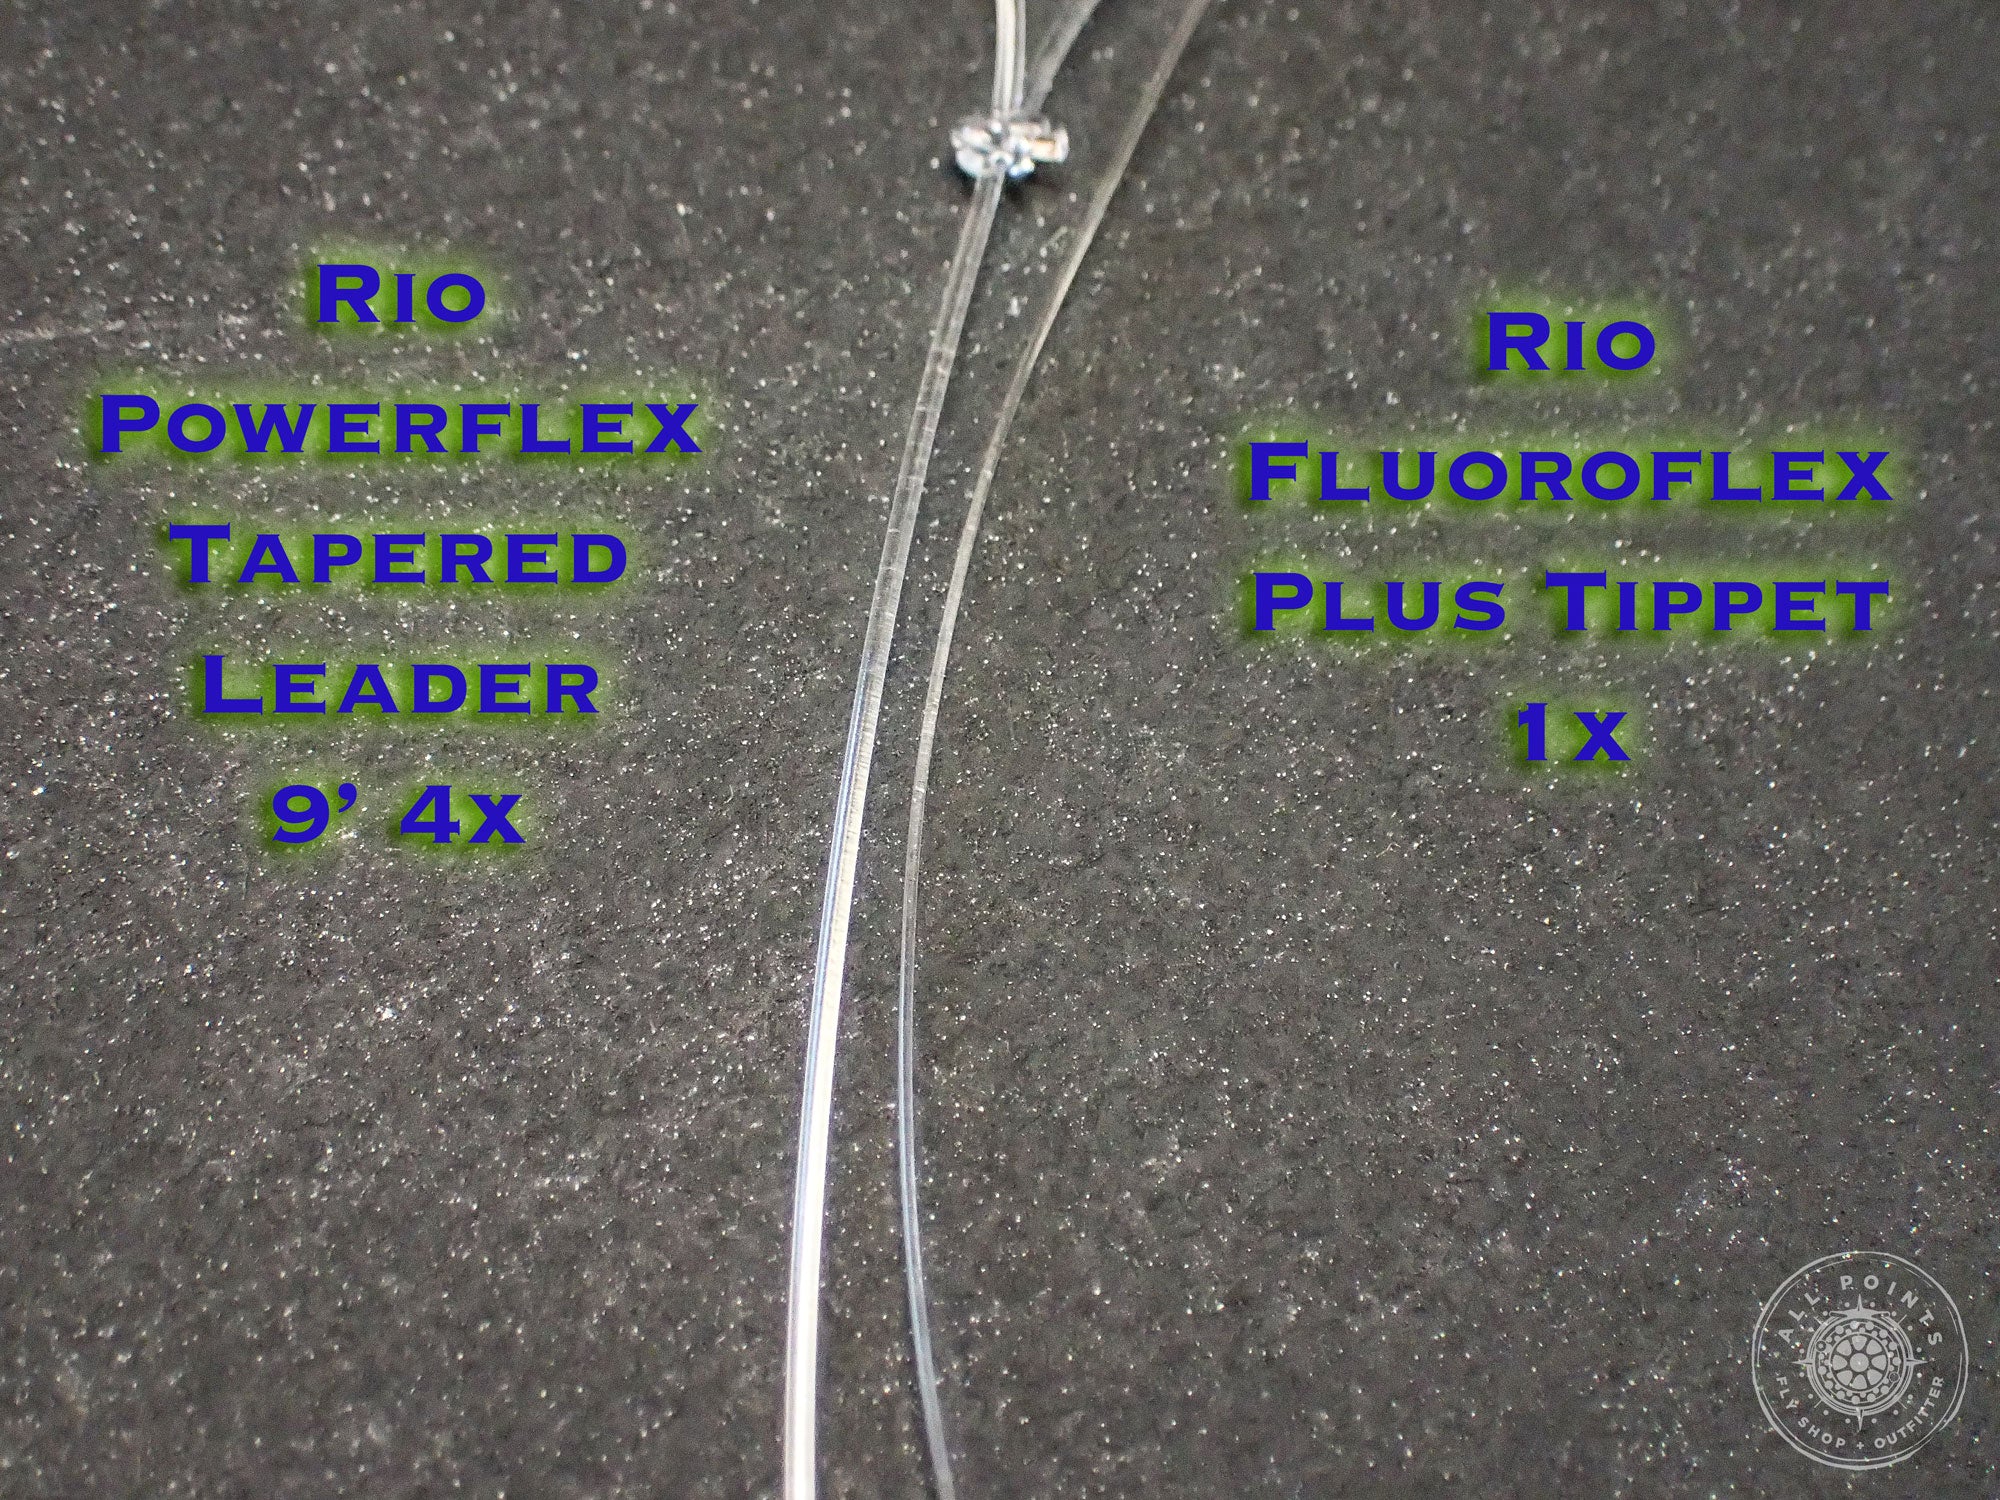 3 Reasons To NOT Use Tapered Leaders When Fishing A Sinking Line